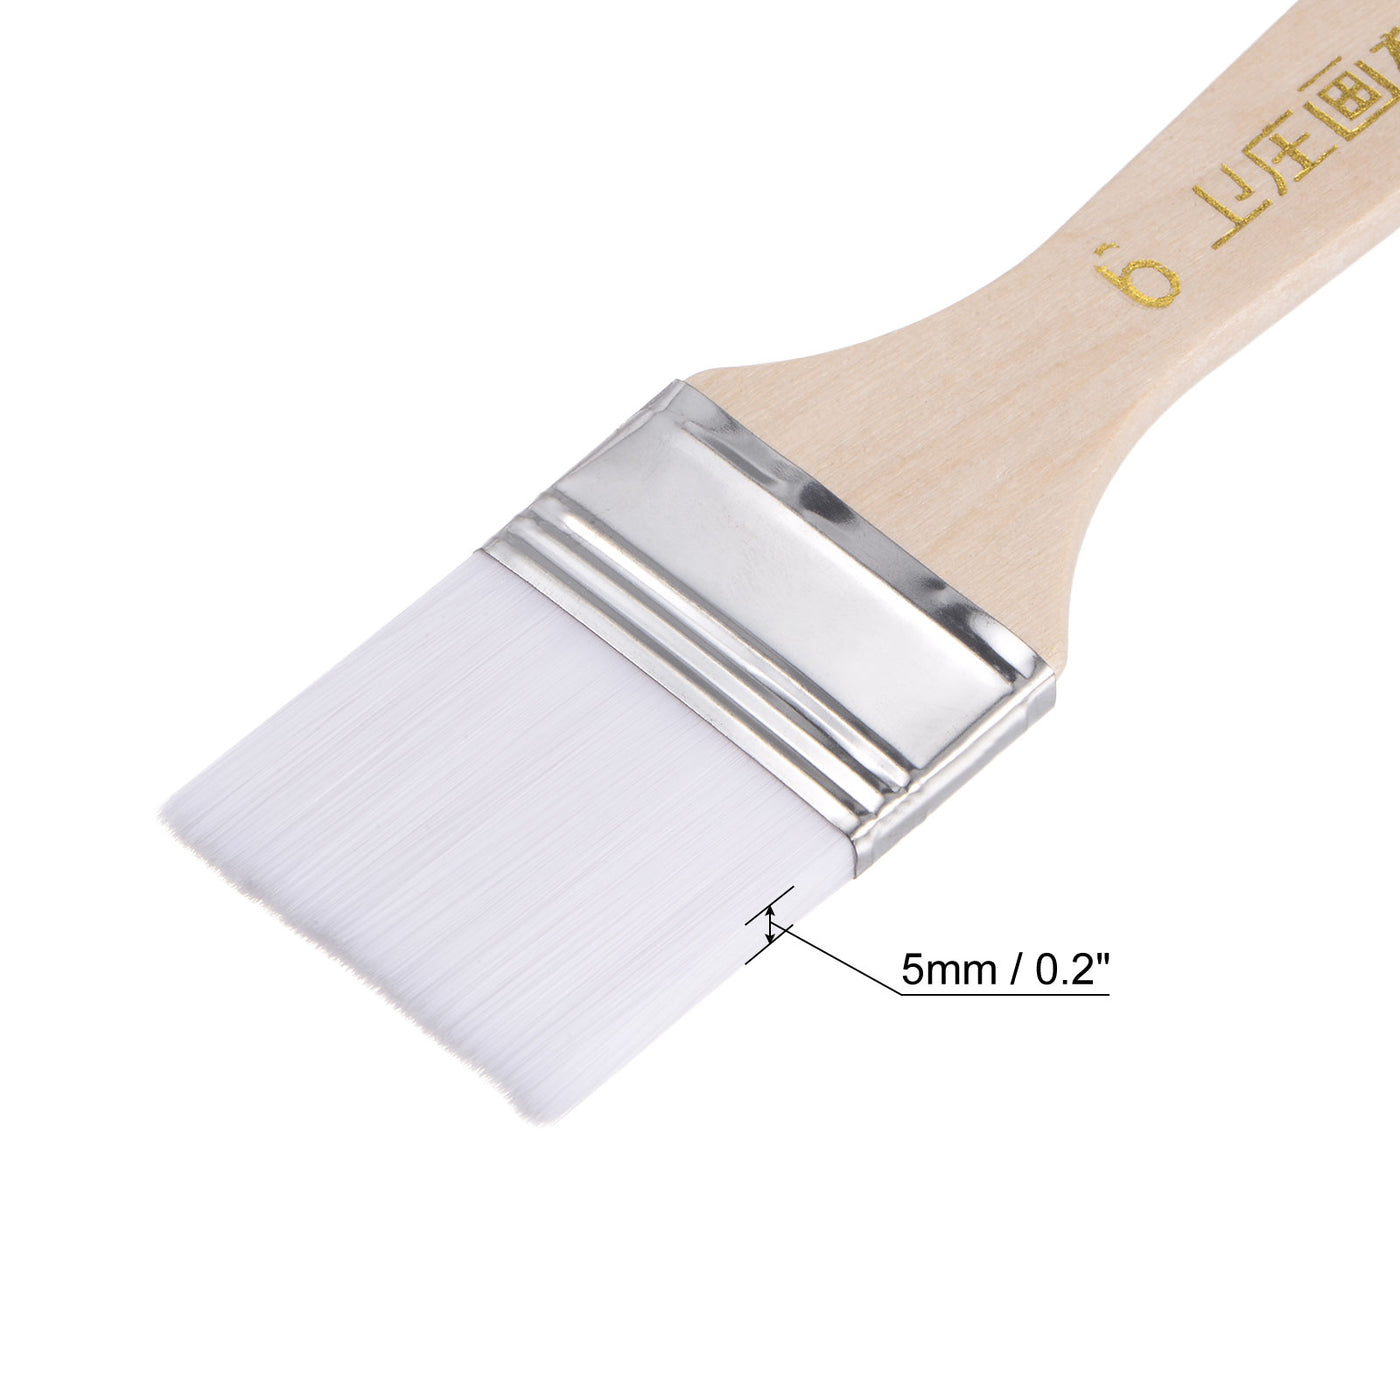 uxcell Uxcell 1.5" Width Small Paint Brush Nylon Bristle with Wood Handle Tool, White 3Pcs